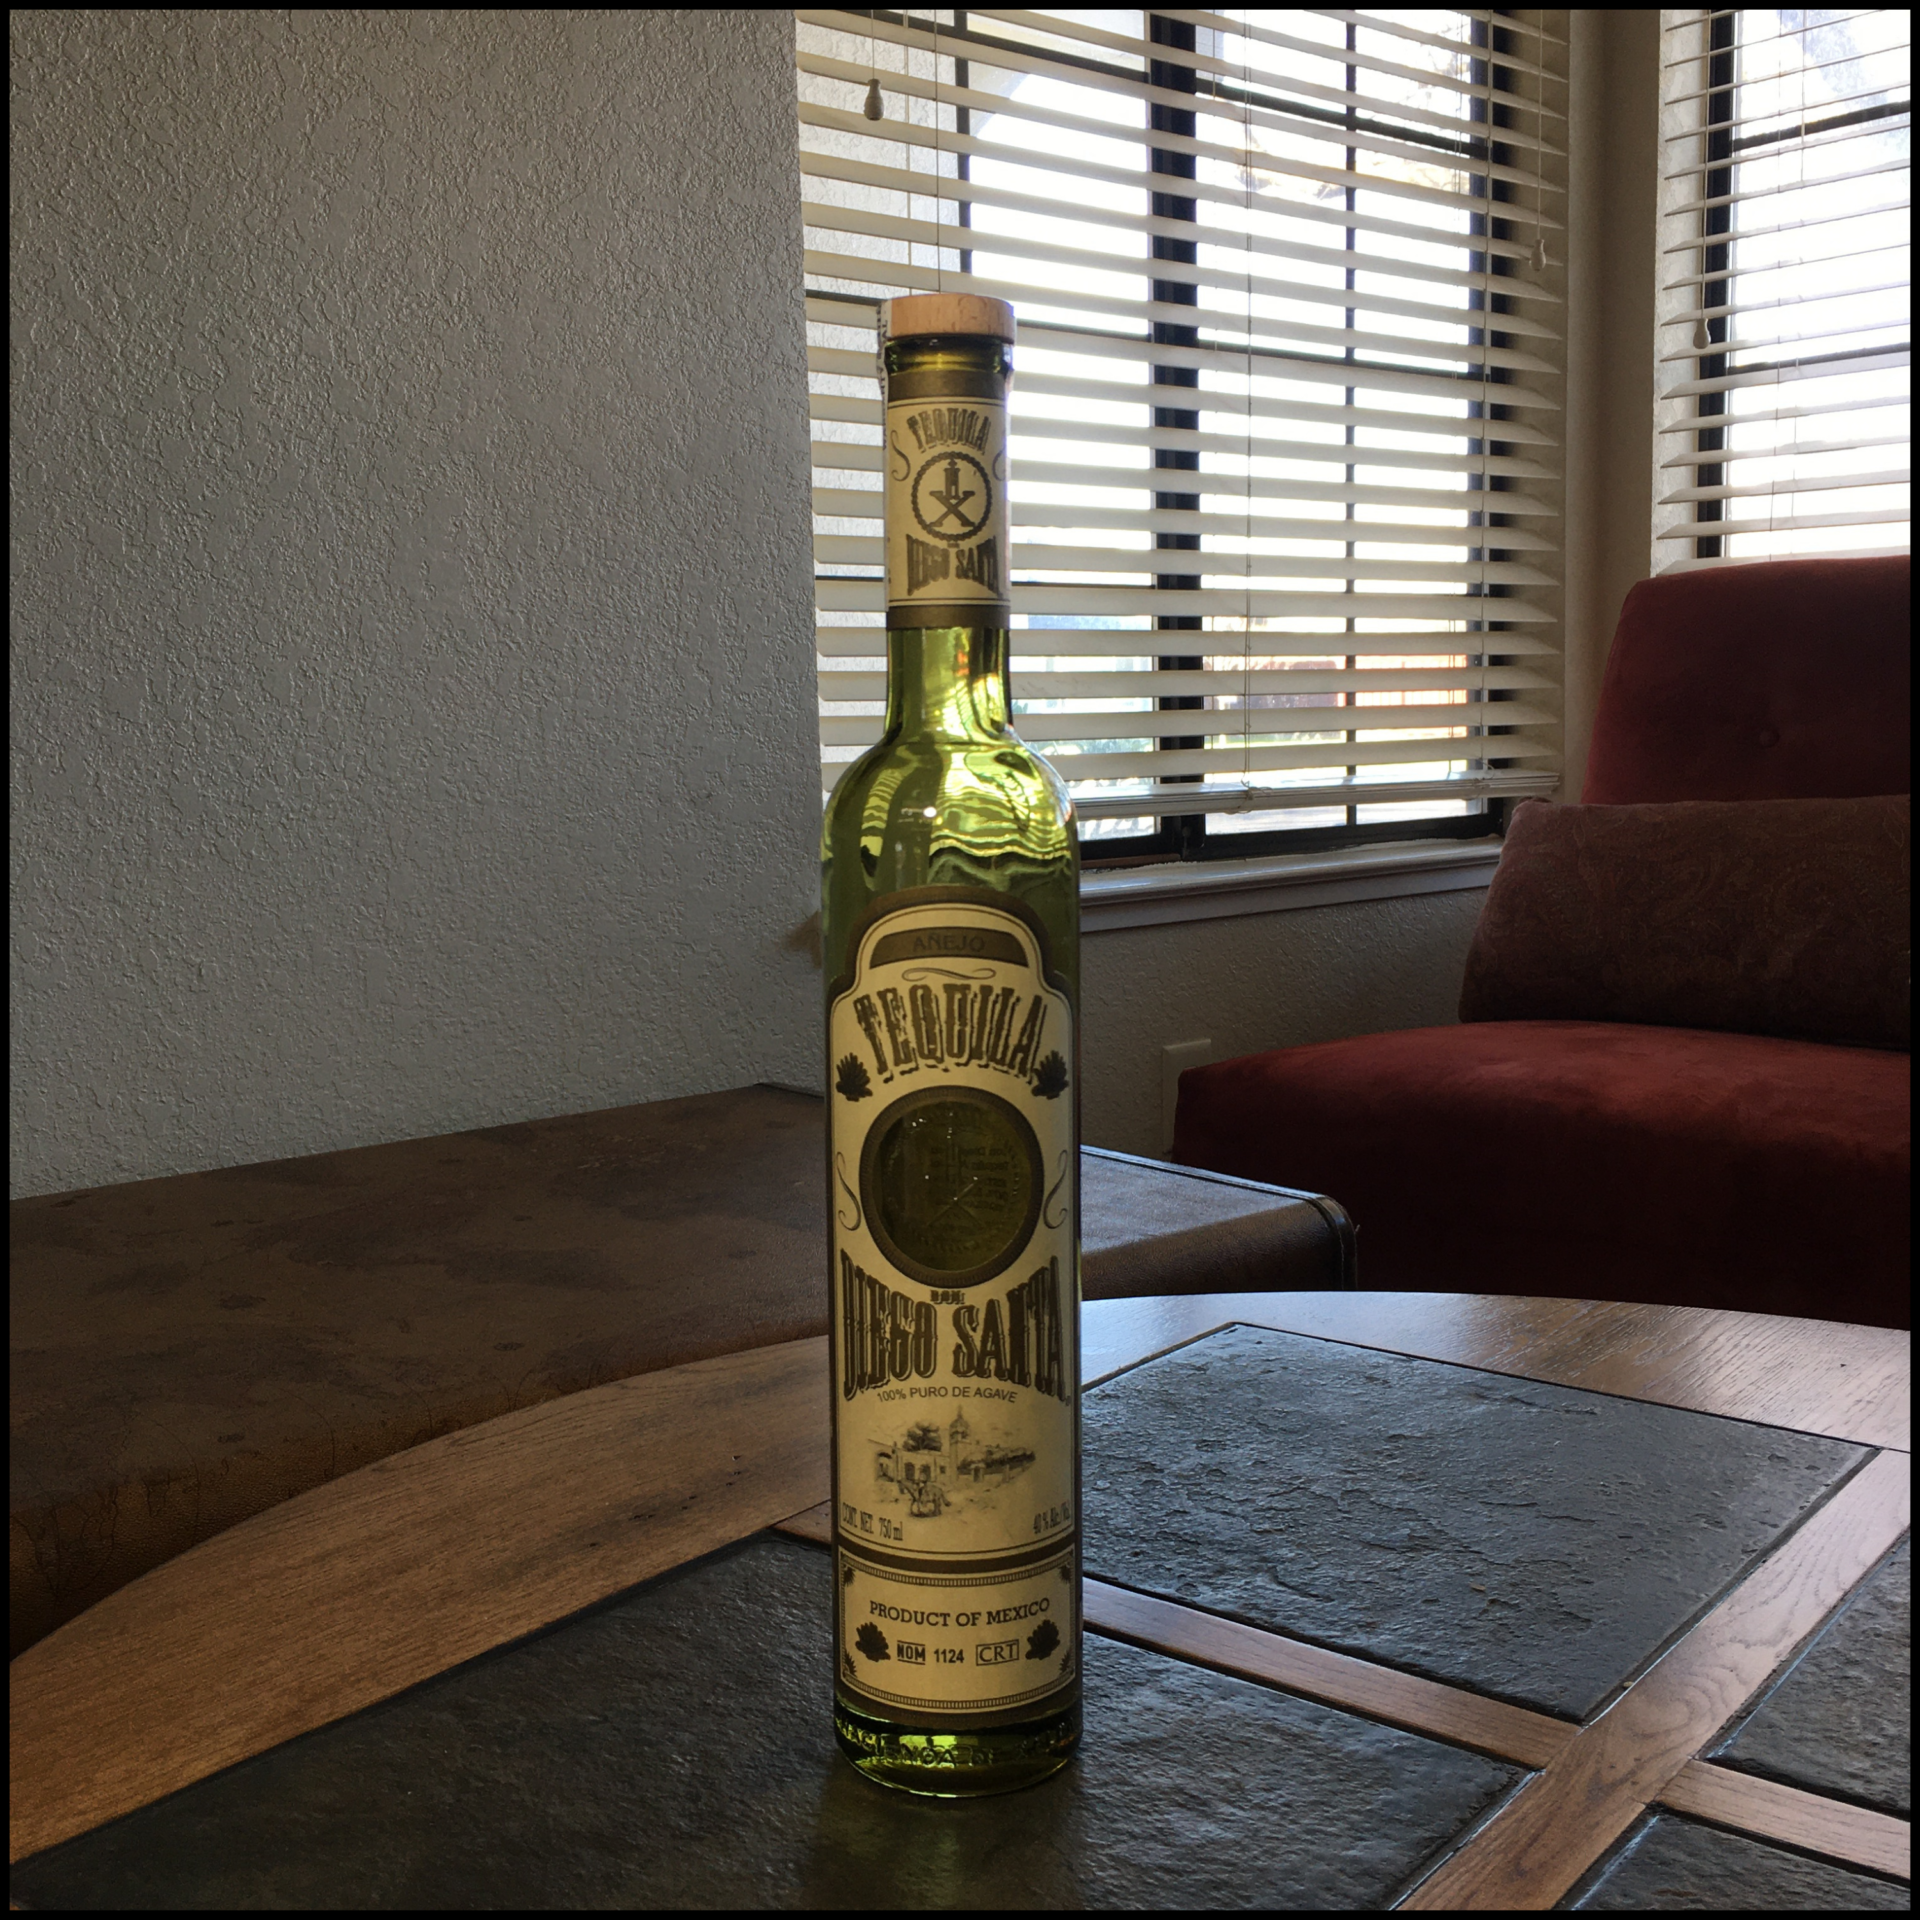 Bottle of Don Diego Santa Tequila Añejo on top of a grey stone and wooden table, in front of a living room window and background furniture.